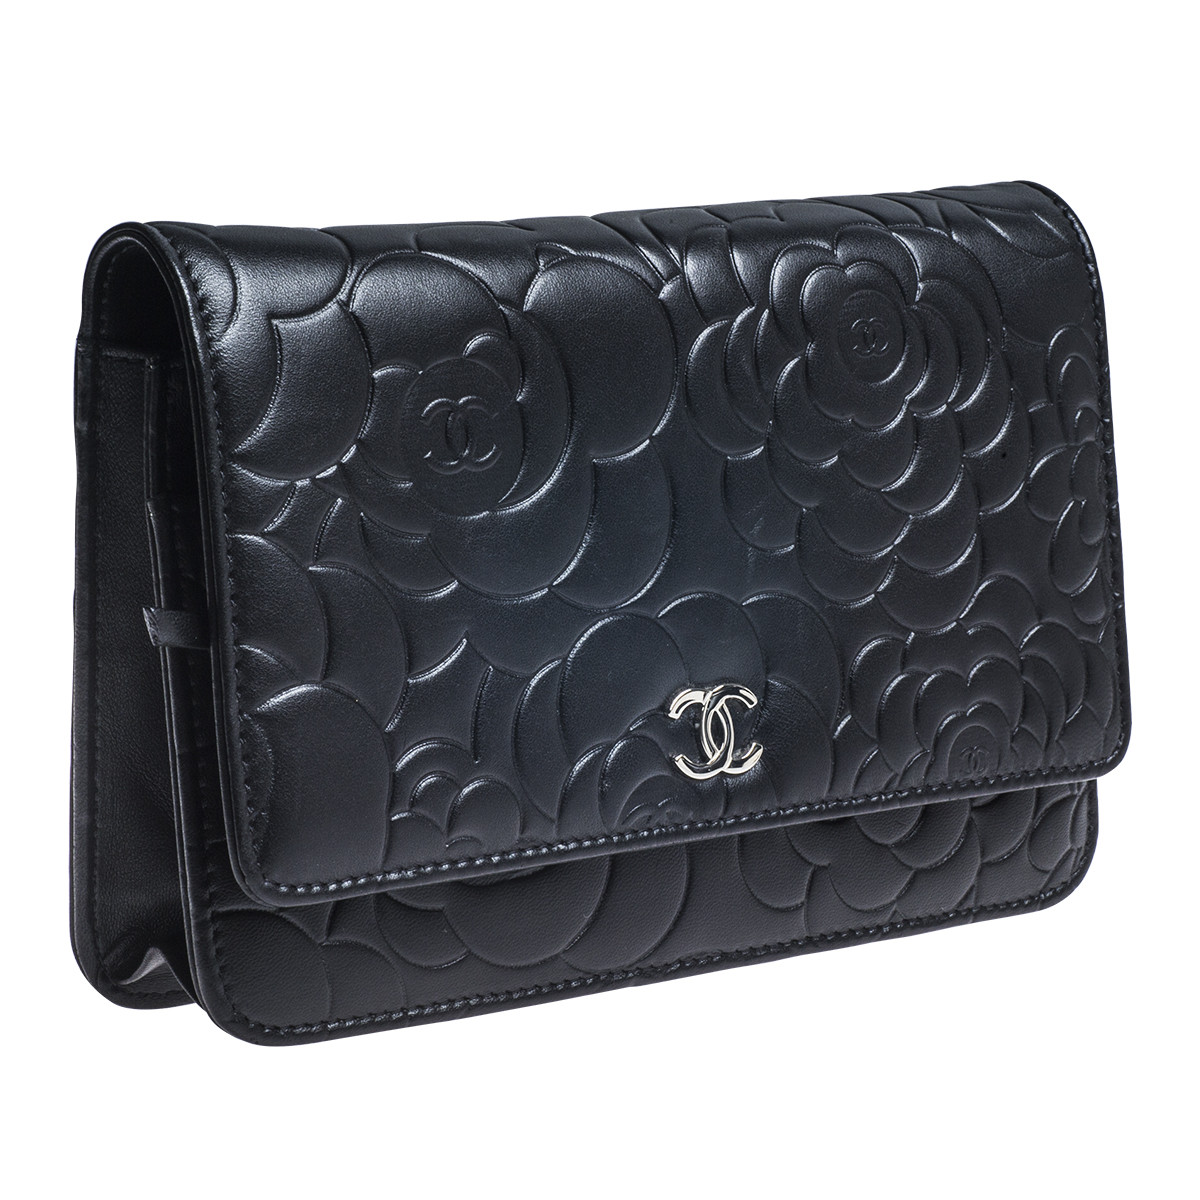 Chanel Black Lambskin Leather Tote Bag with Camellia Flower Detail